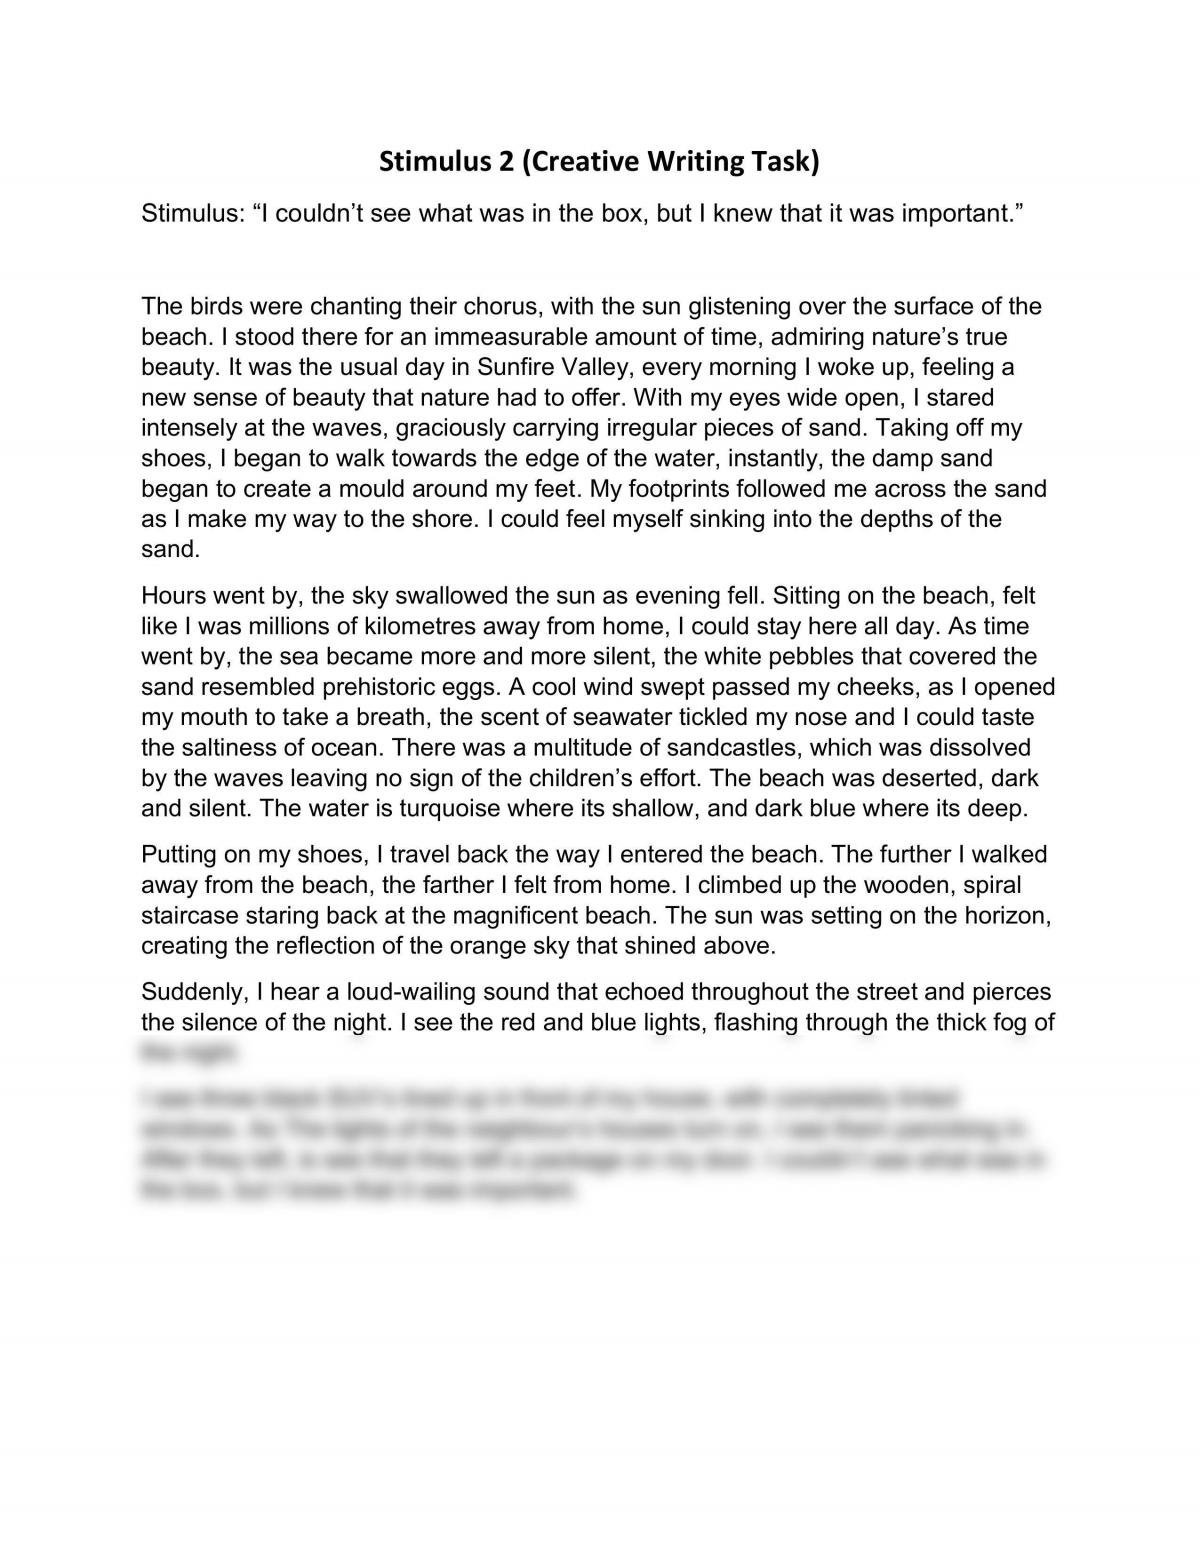 short story in english for assignment